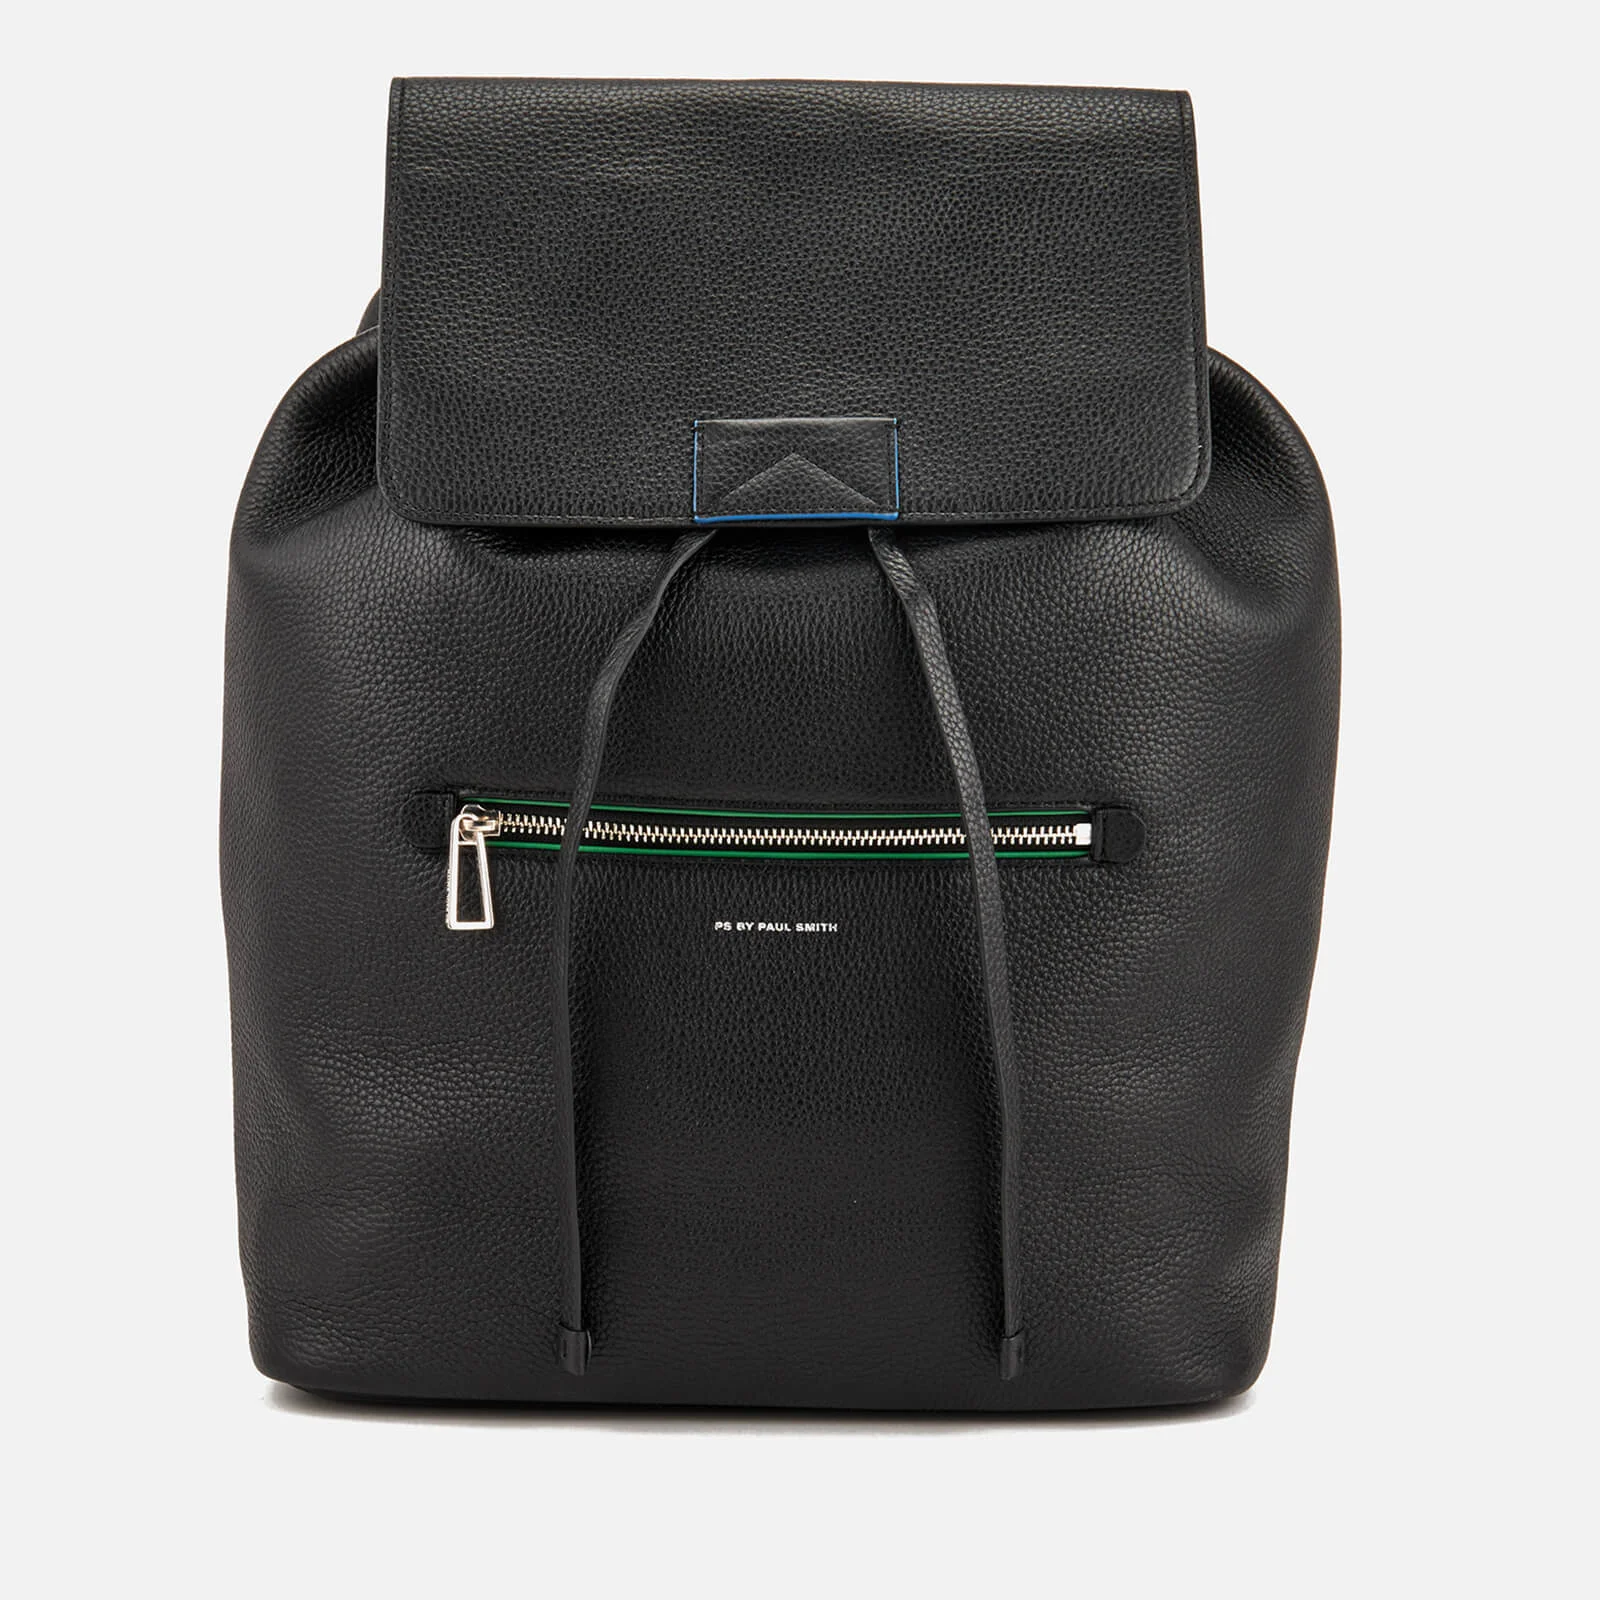 PS by Paul Smith Men's Sports Grain Backpack - Black Image 1